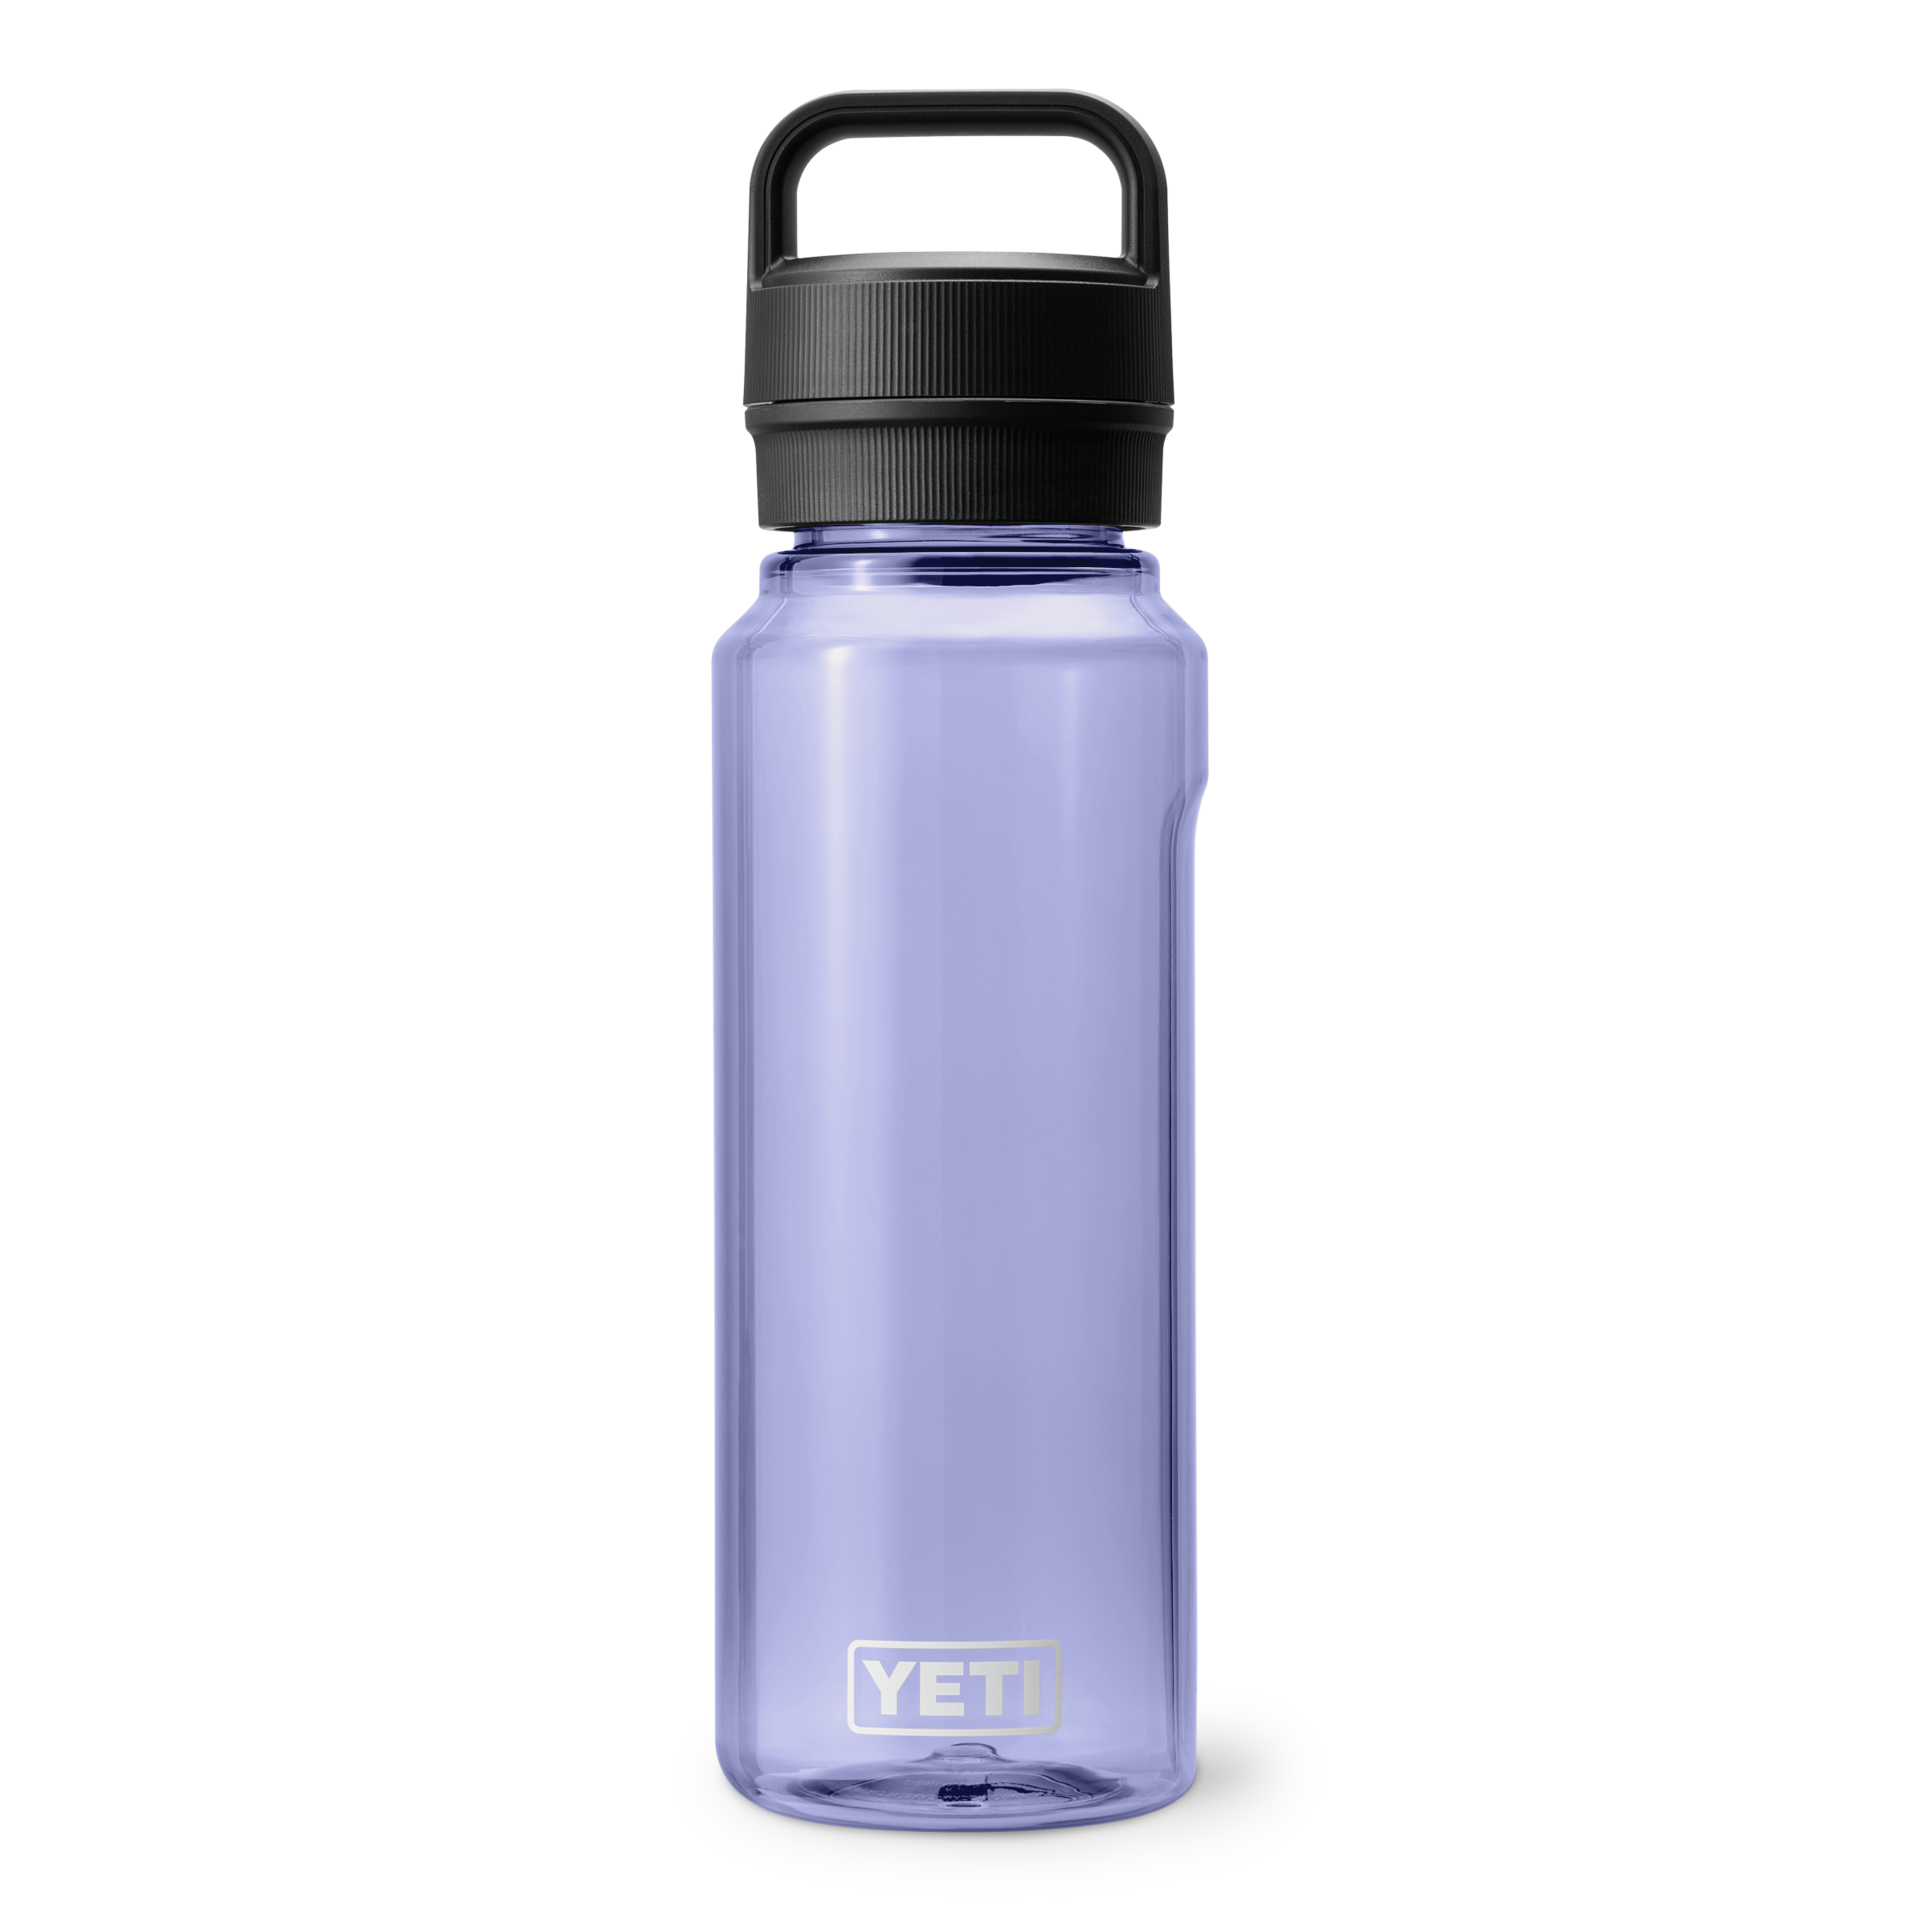 W-220111_2H23_Color_Launch_Drinkware_site_studio_Yonder_1L_Cosmic_Lilac_Front_0763_Primary_B_2400x2400_c952188a-8780-4310-abc2-75819474f558.png